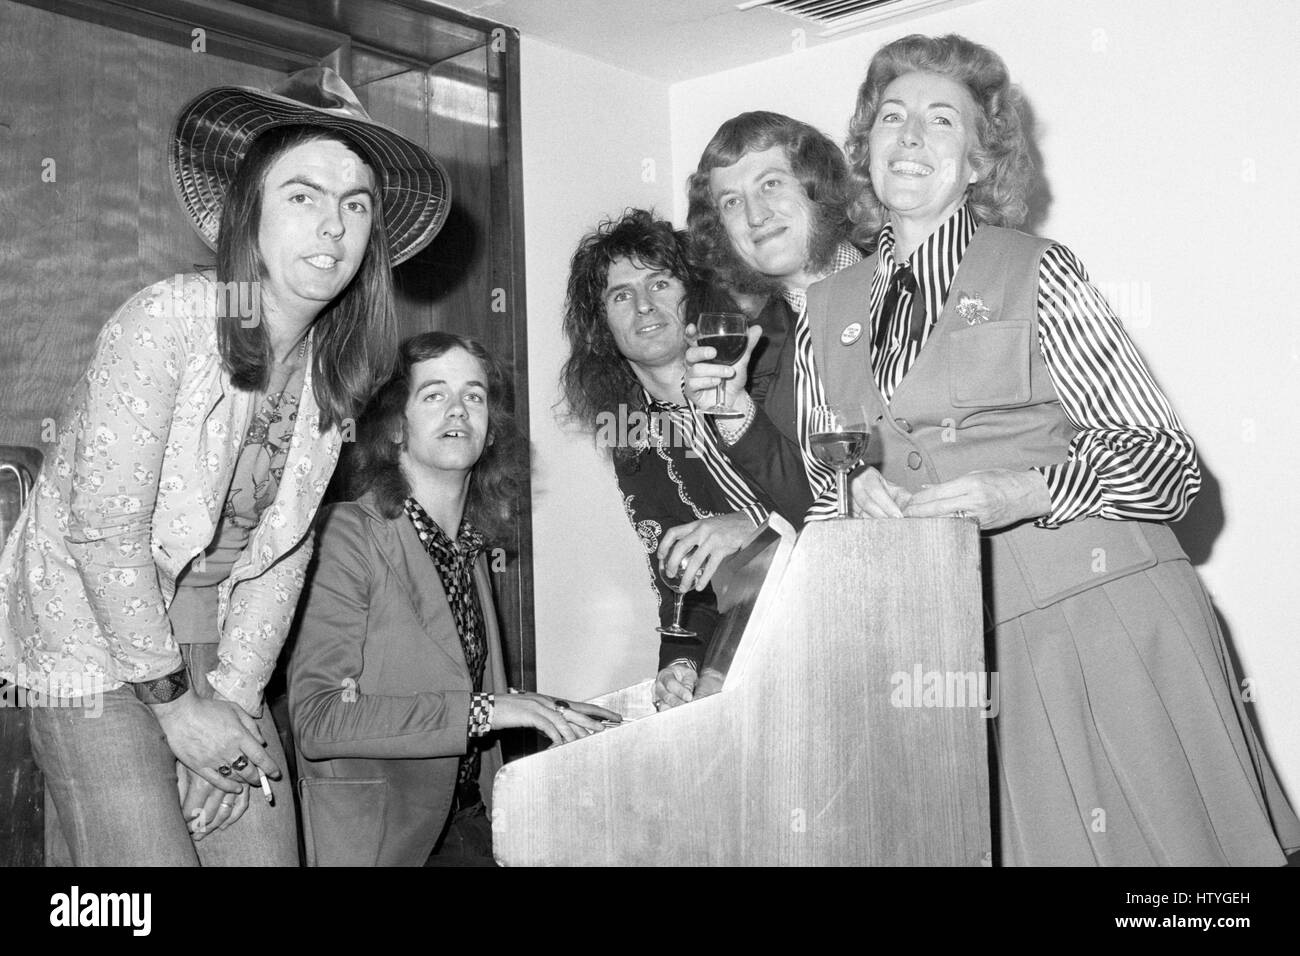 Singer Vera Lynn, 55, joins the Slade pop group around a piano in London. They were all guests at a lunch for the presentation of the New Musical annual awards to the record industry. Slade feature (l-r) David Hill, Jimmy Lea, Don Powell and Noddy Holder. Stock Photo